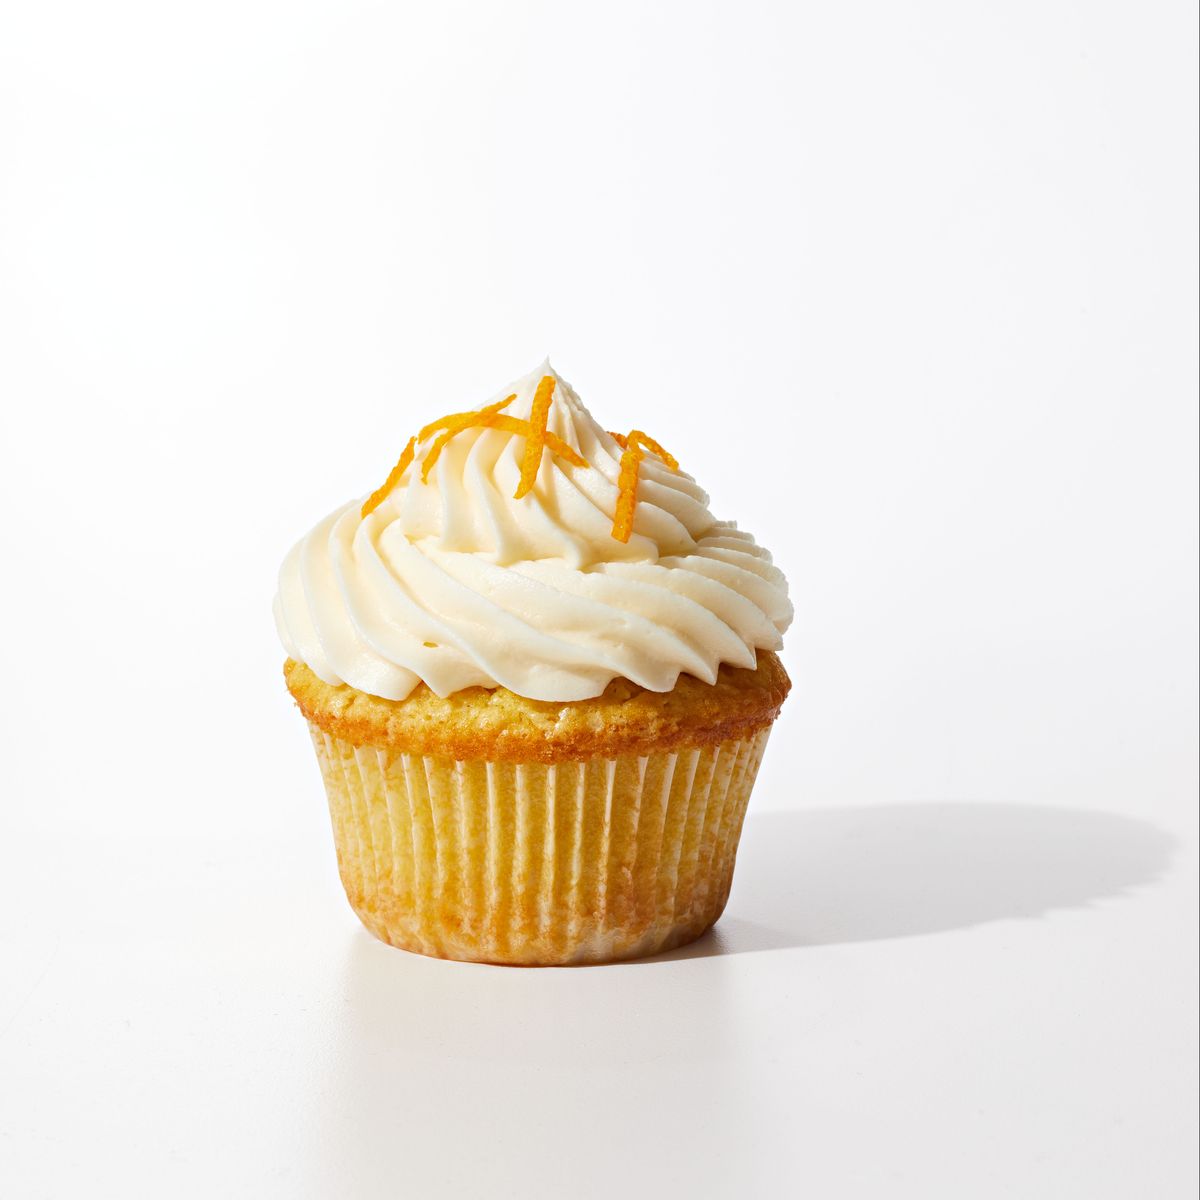 ricotta-orange-cupcakes-with-buttercream-frosting-64d13677115a6